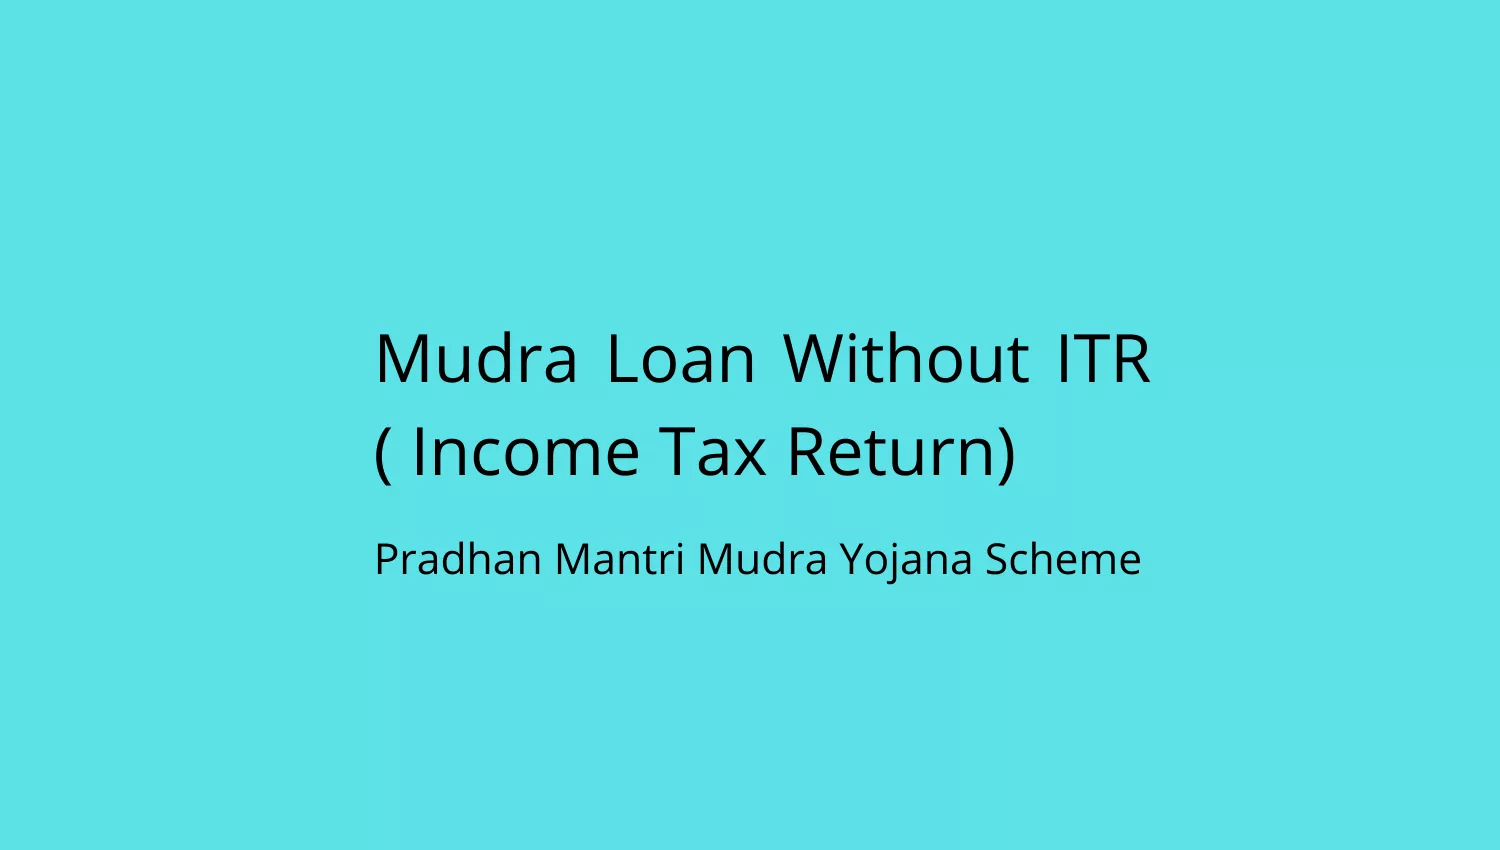 Mudra Loan Without ITR Income Tax Return